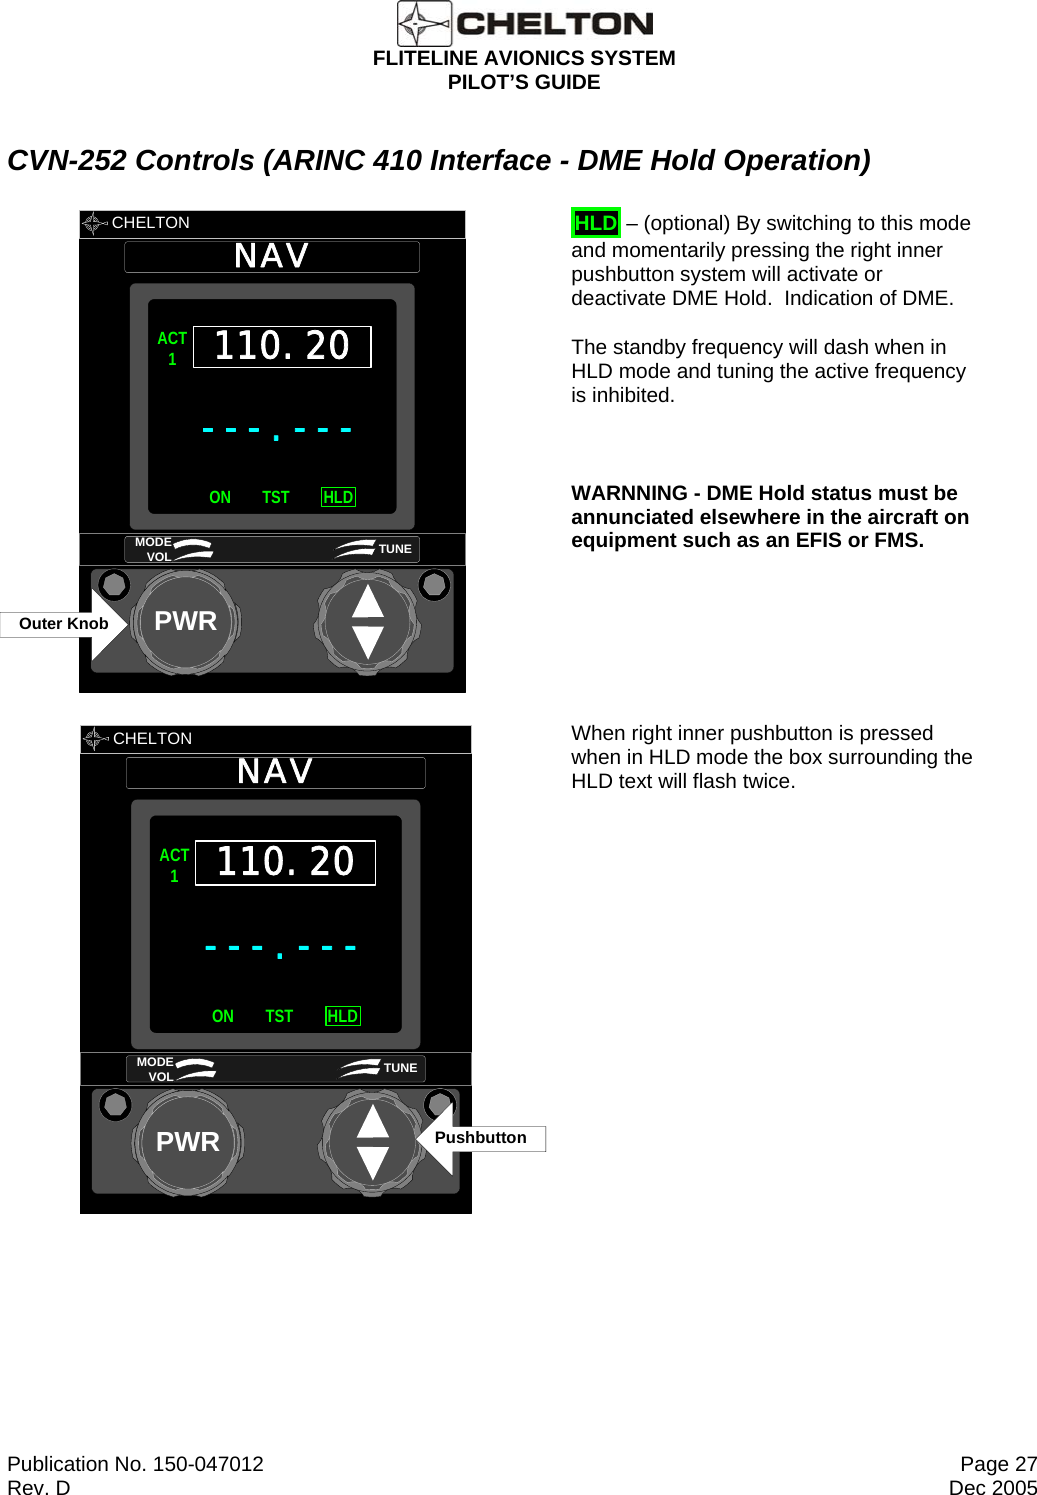  FLITELINE AVIONICS SYSTEM PILOT’S GUIDE  Publication No. 150-047012  Page 27 Rev. D  Dec 2005 CVN-252 Controls (ARINC 410 Interface - DME Hold Operation)       CHELTON NAVPWR---.---ACT1ON HLDTST110.20MODE VOL TUNEOuter Knob       HLD – (optional) By switching to this mode and momentarily pressing the right inner pushbutton system will activate or deactivate DME Hold.  Indication of DME.    The standby frequency will dash when in HLD mode and tuning the active frequency is inhibited.  WARNNING - DME Hold status must be annunciated elsewhere in the aircraft on equipment such as an EFIS or FMS.        CHELTON NAVPWR---.---ACT1ON HLDTST110.20MODE VOL TUNEPushbuttonWhen right inner pushbutton is pressed when in HLD mode the box surrounding the HLD text will flash twice. 